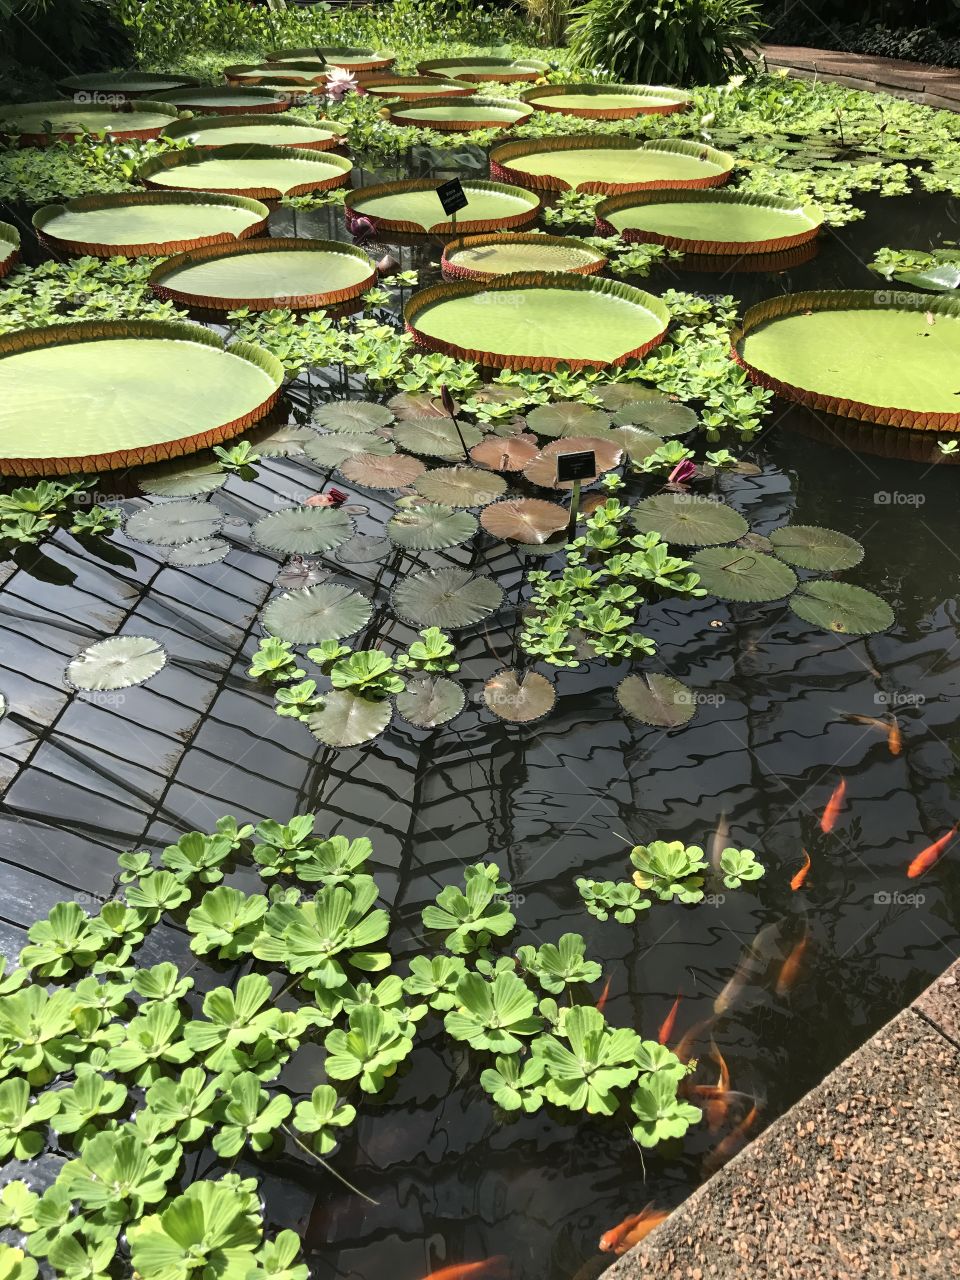 Koi swim in a pond under lily pads at the Royal Botanical Gardens in Scotland